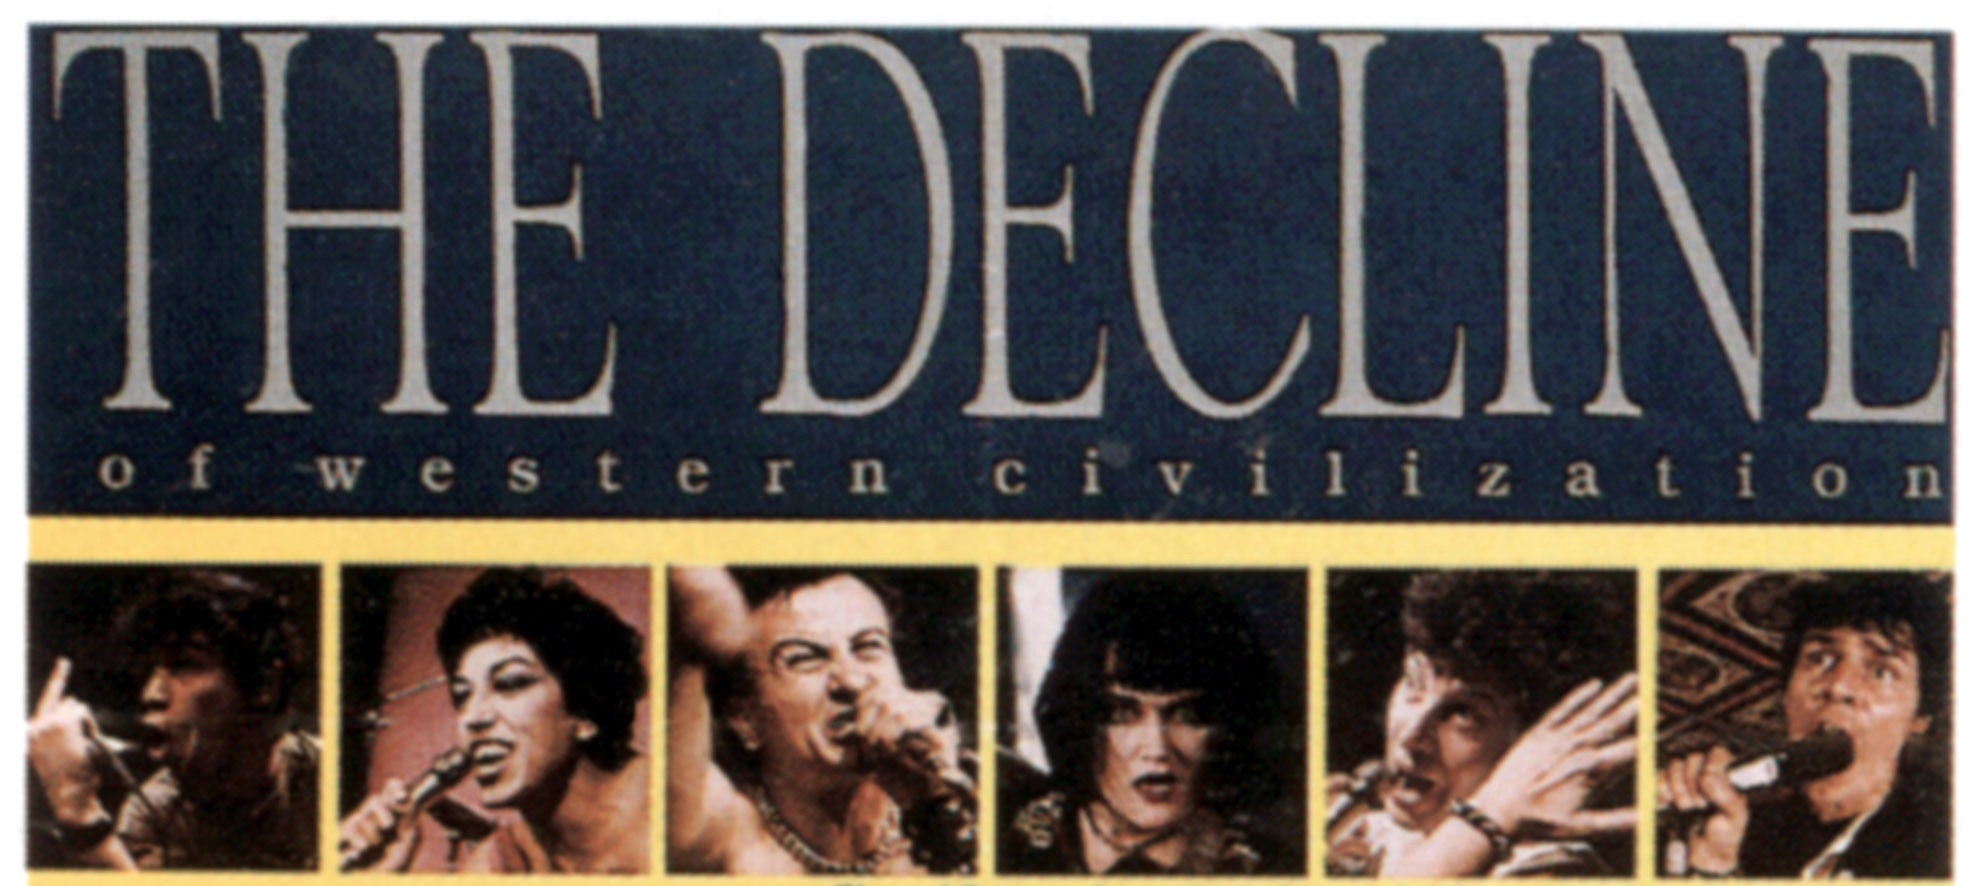 Theatrical Poster for &quot;The Decline of Western Civilization&quot;